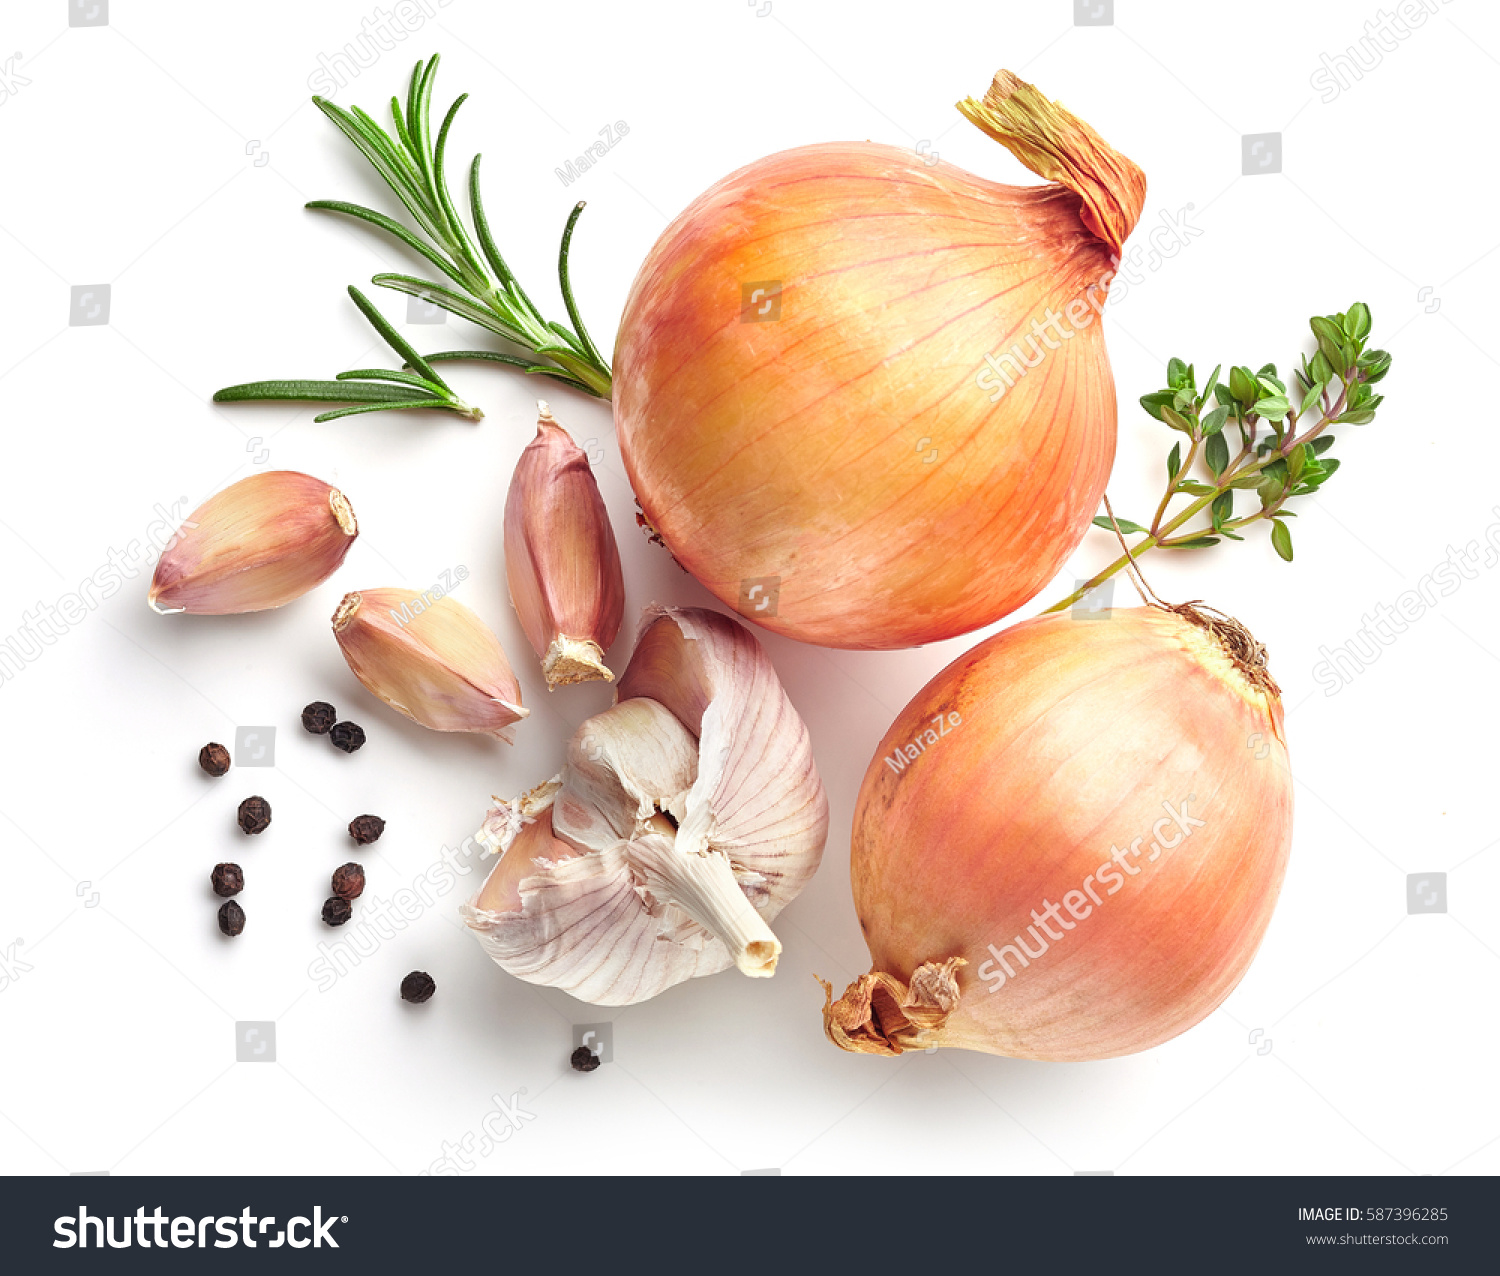 onions, garlic and spices isolated on white background, top view #587396285